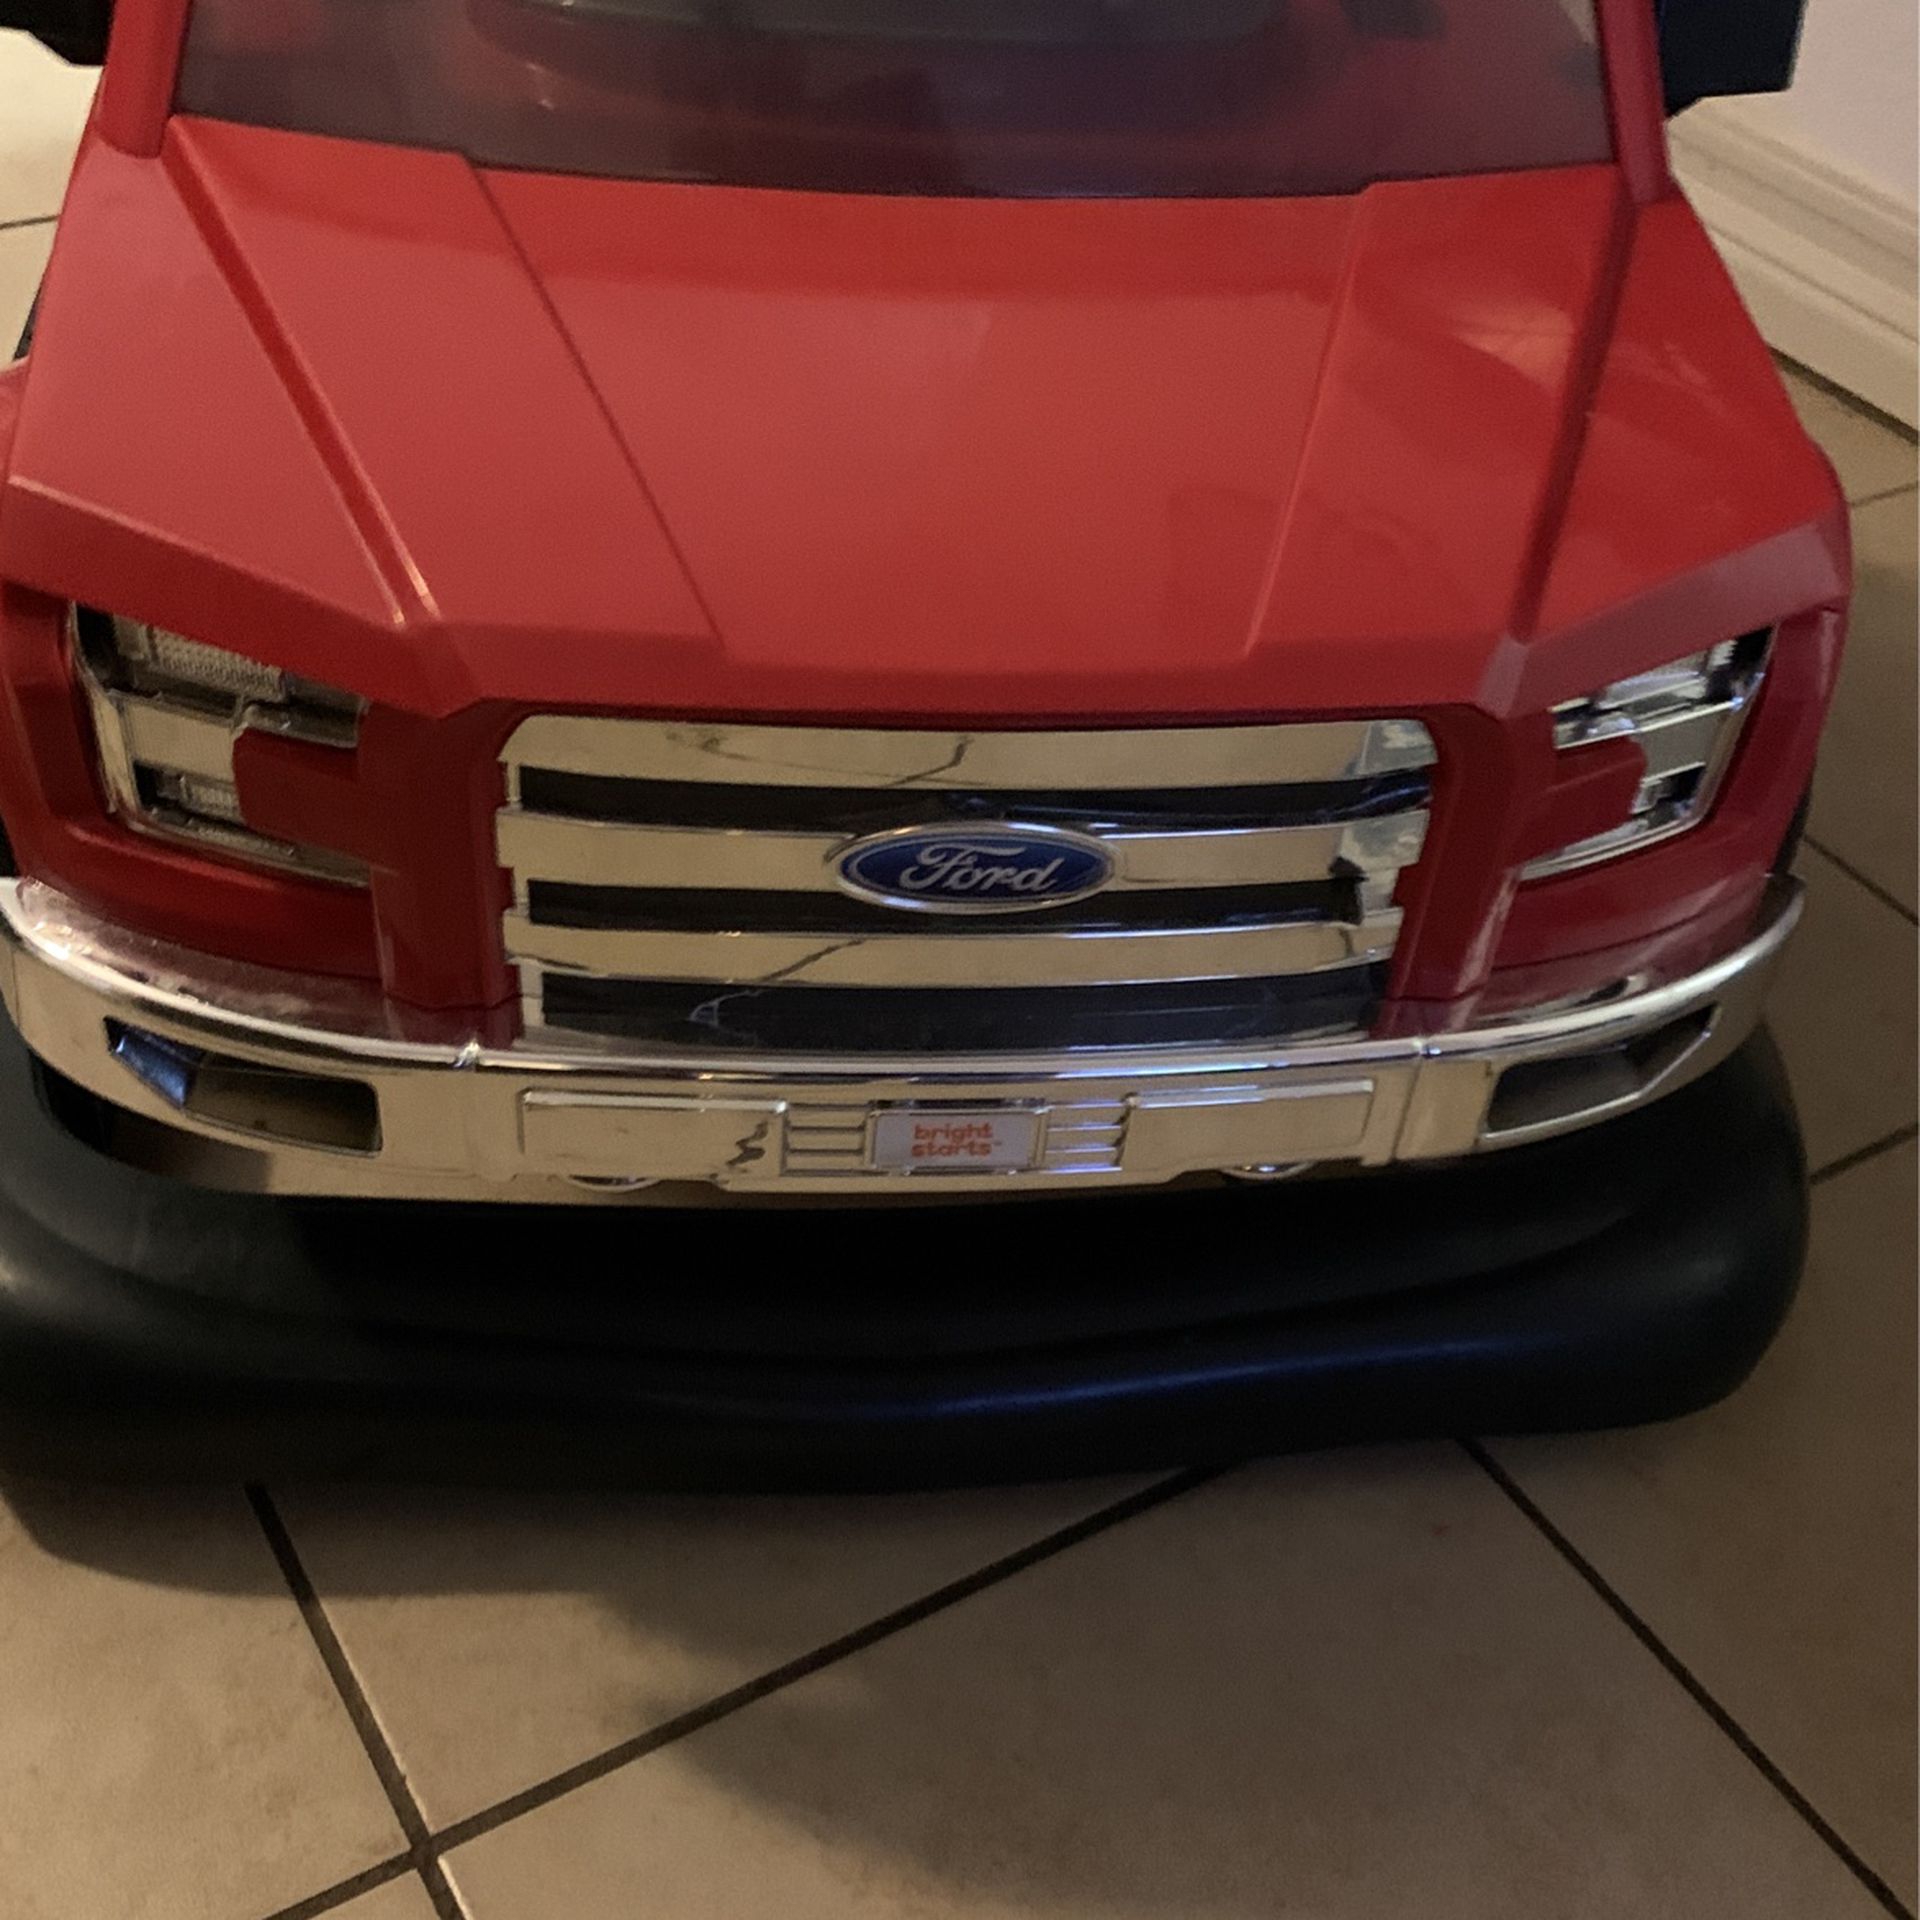 Ford F150 Baby Walker